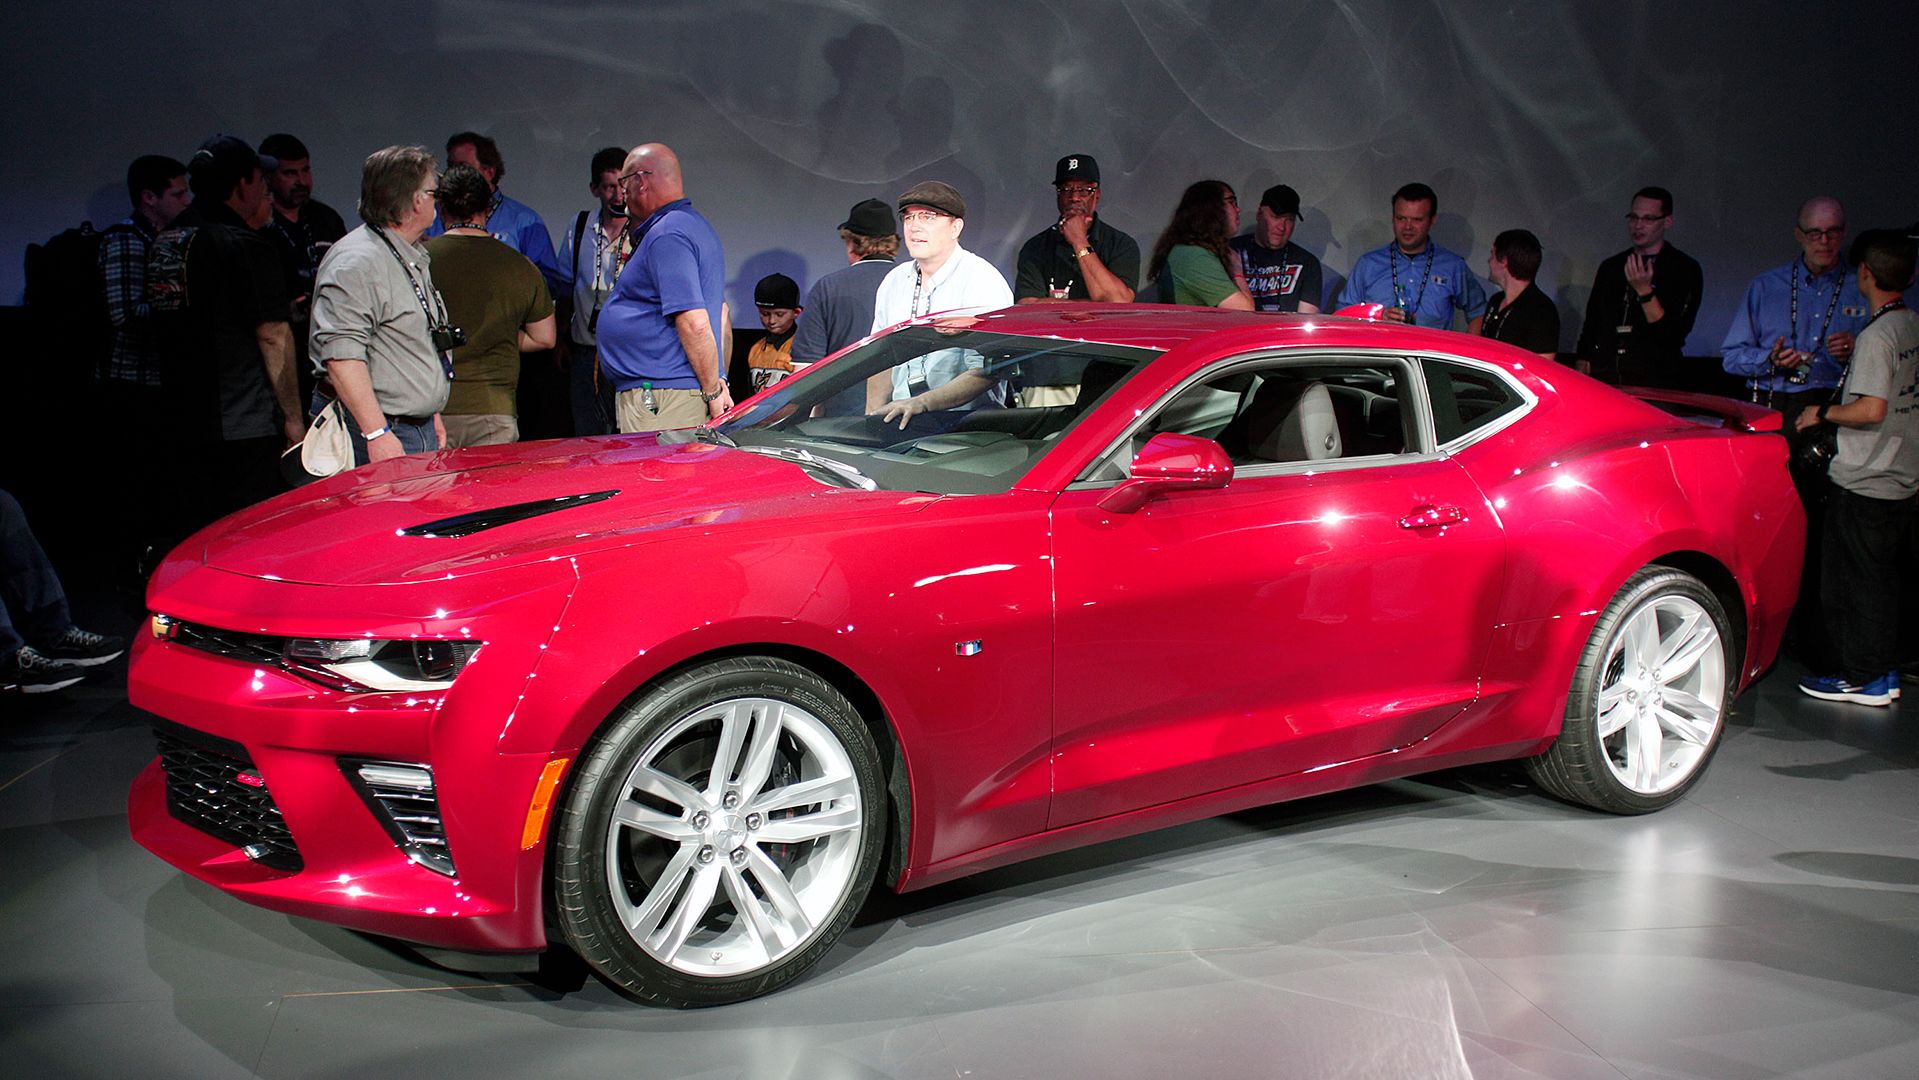 GM to stop making Chevy Camaro, leaving muscle car's future uncertain